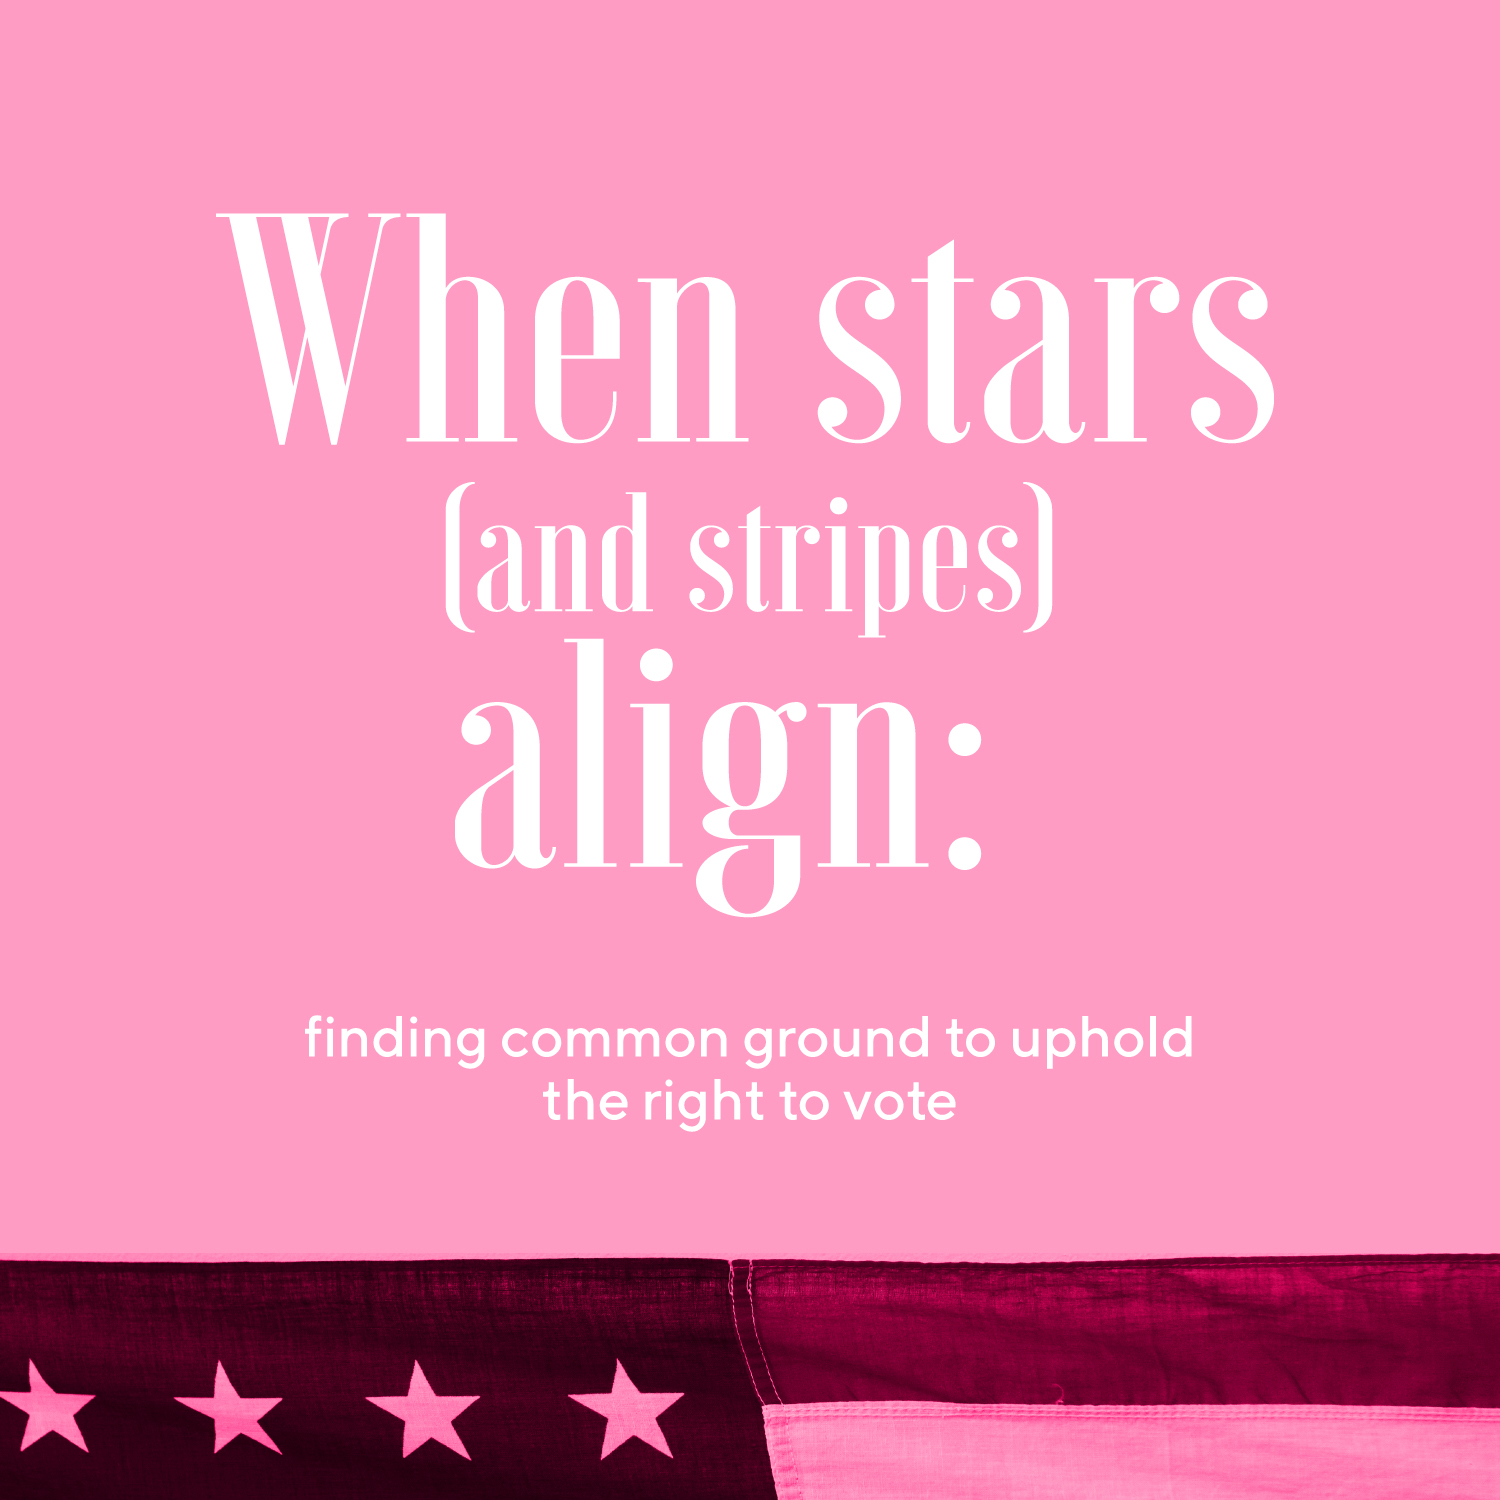 When stars (and stripes) align: finding common ground to uphold the right to vote